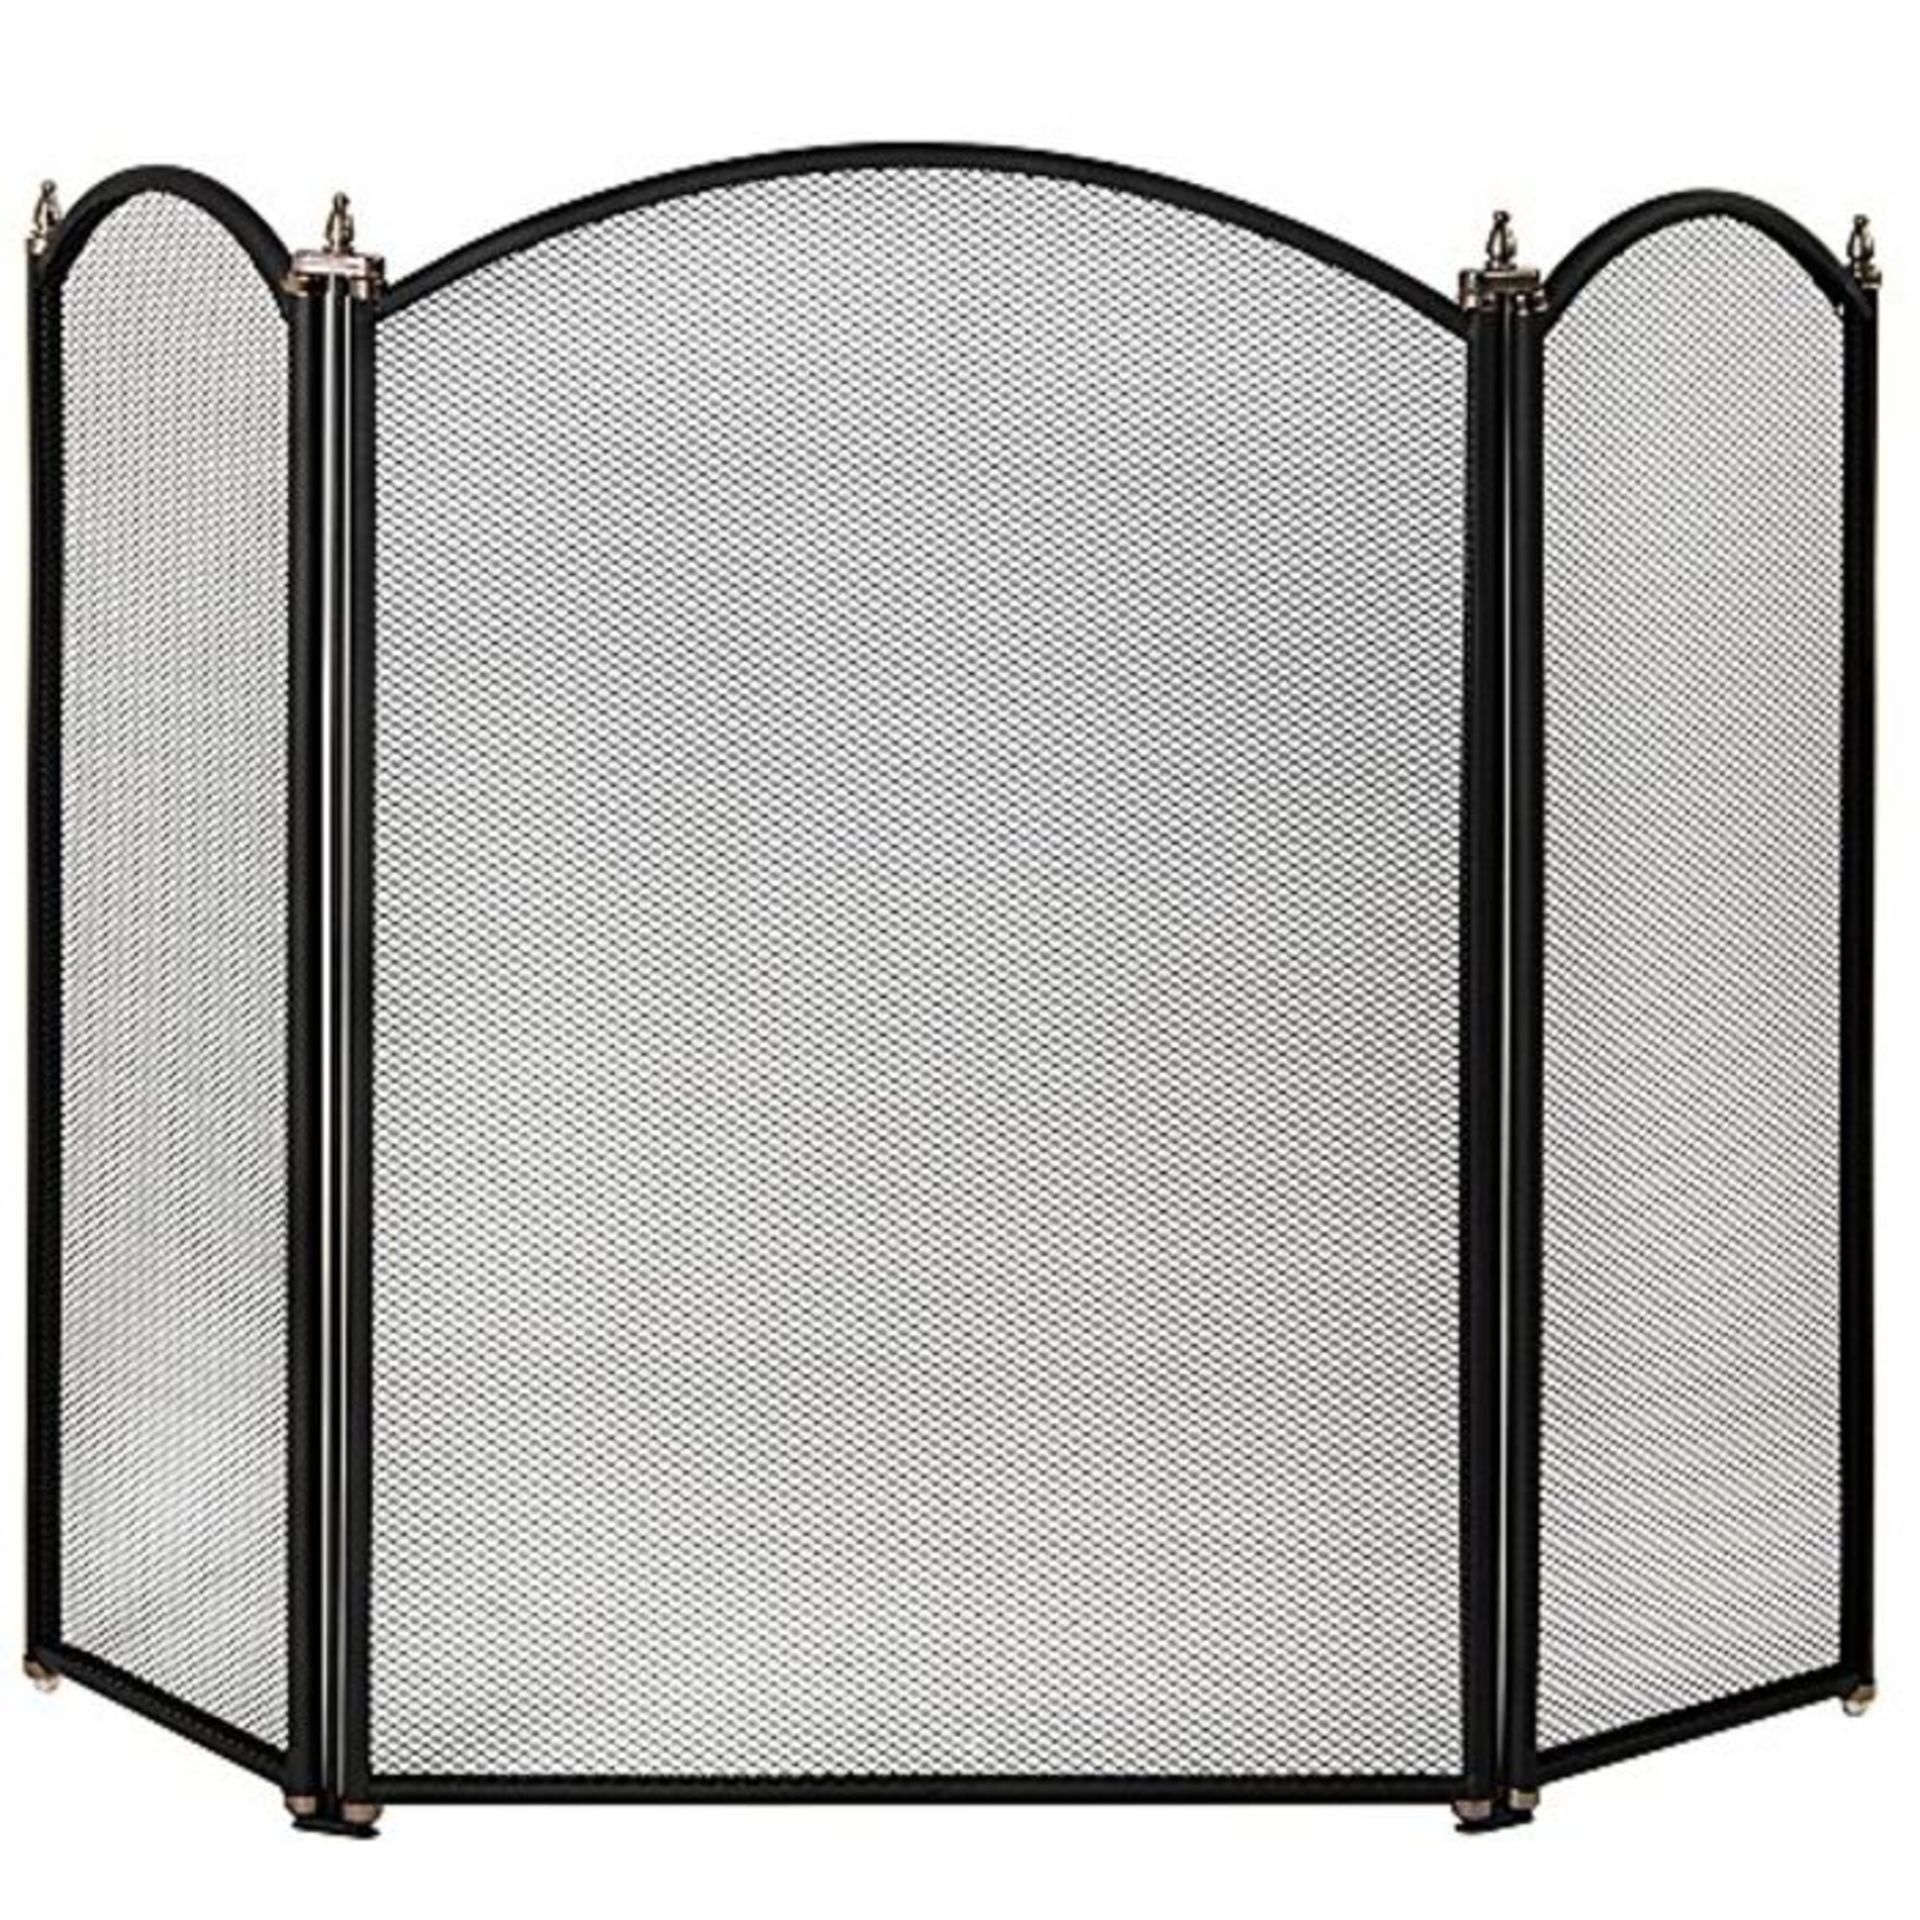 Home Discount® Selby 3 Panel Fire Screen Spark Guard, Black